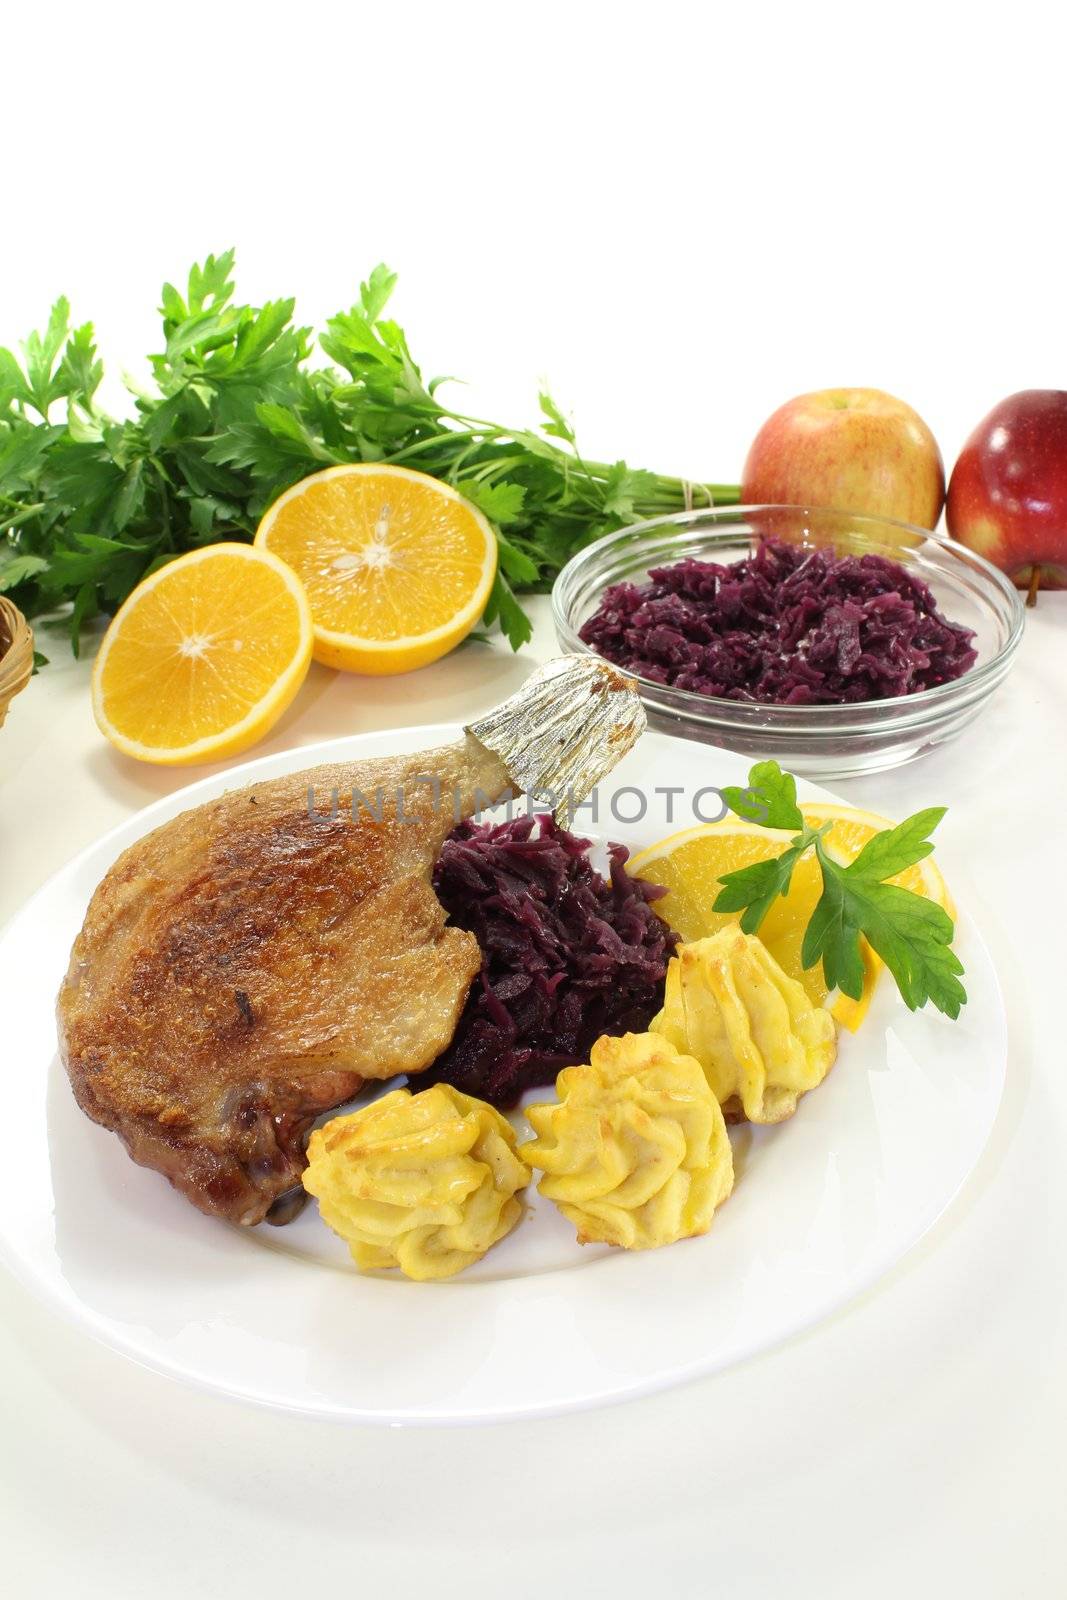 Duck drumstick with duchess potatoes and red cabbage on a light background